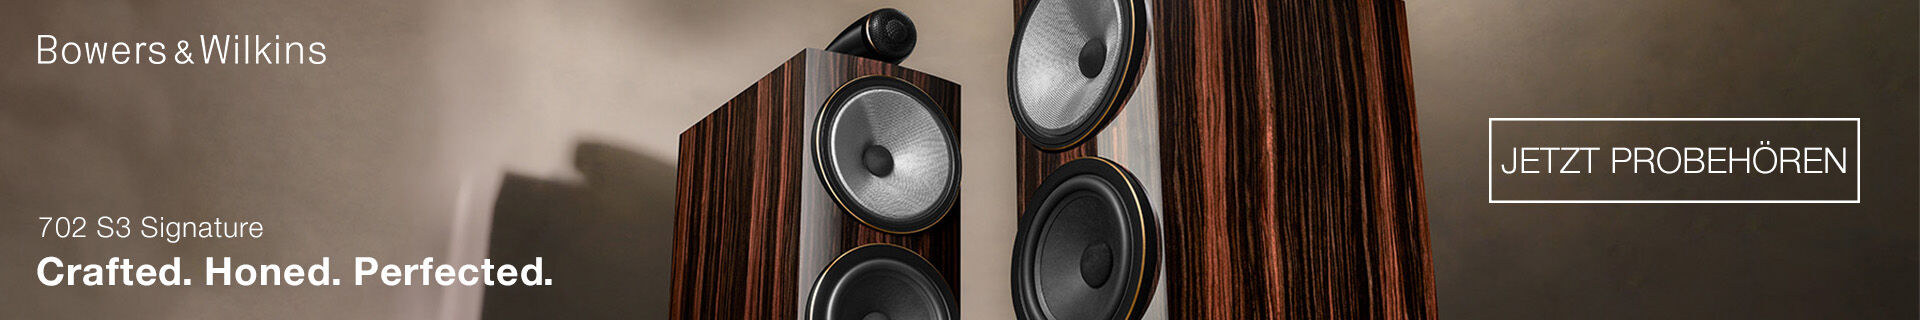 Bowers & Wilkins Serie 700 S3 Signature